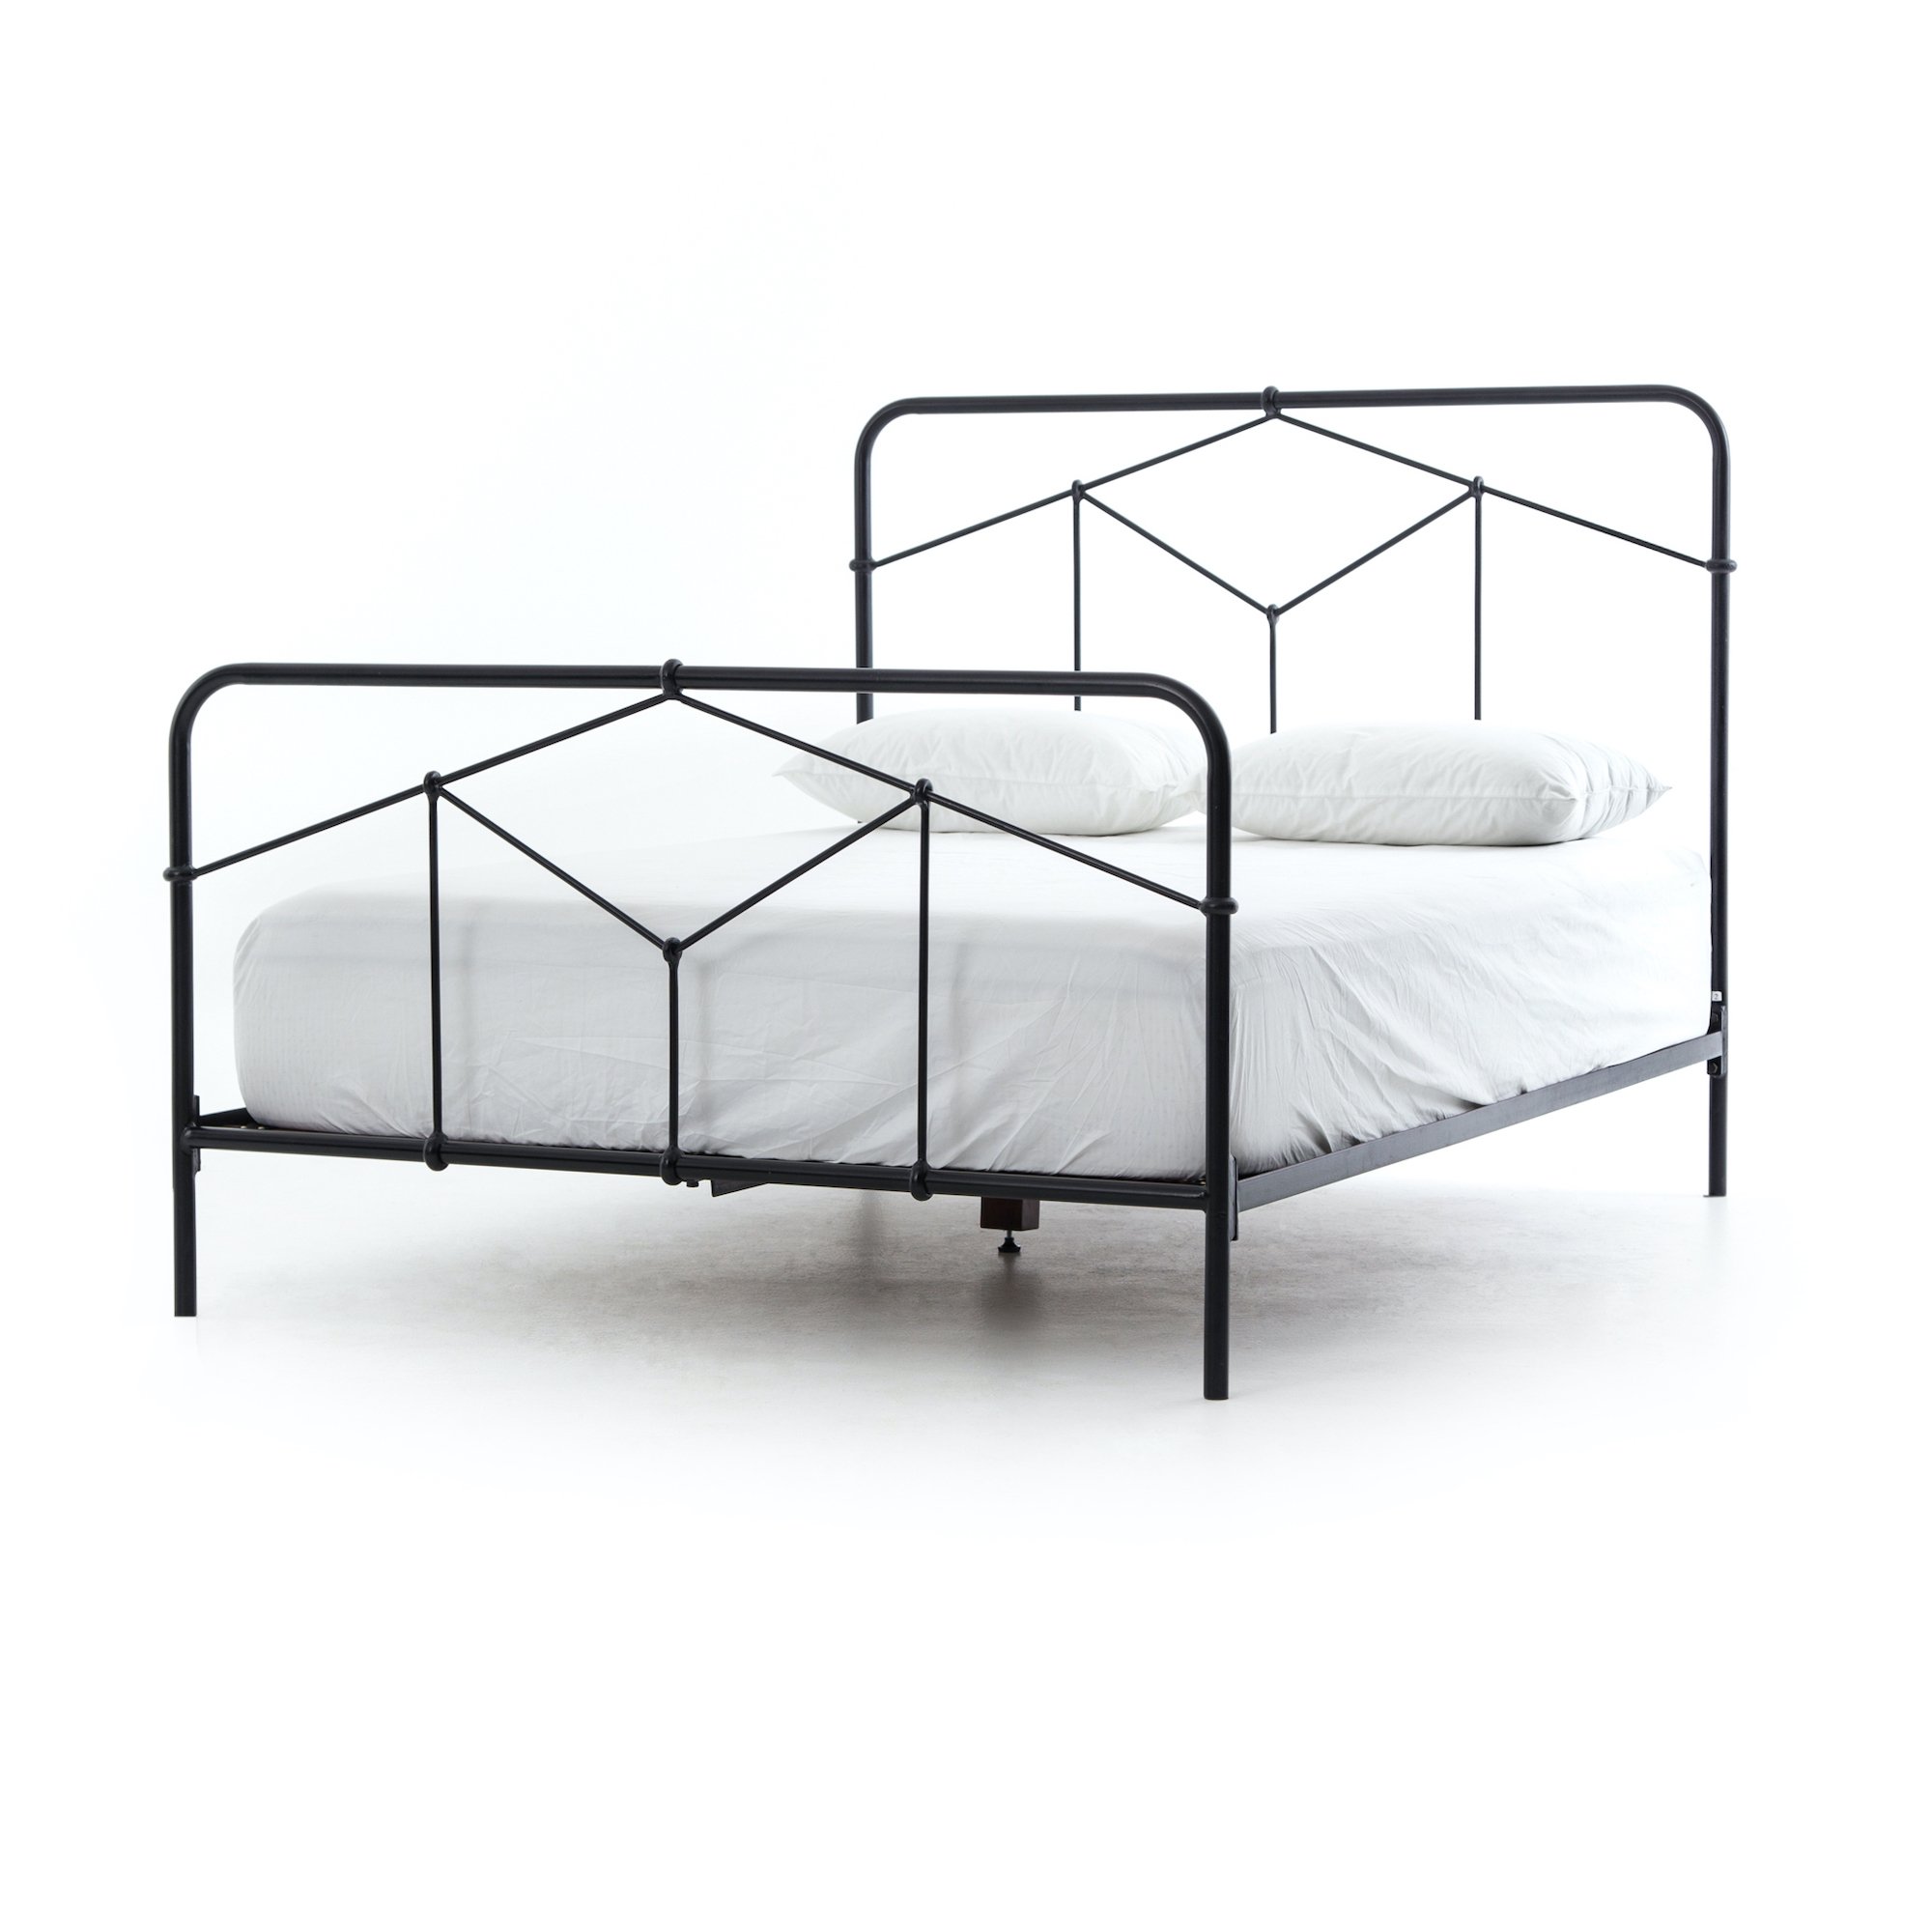 modern black metal bed Items range from $799.00 to $1199.00